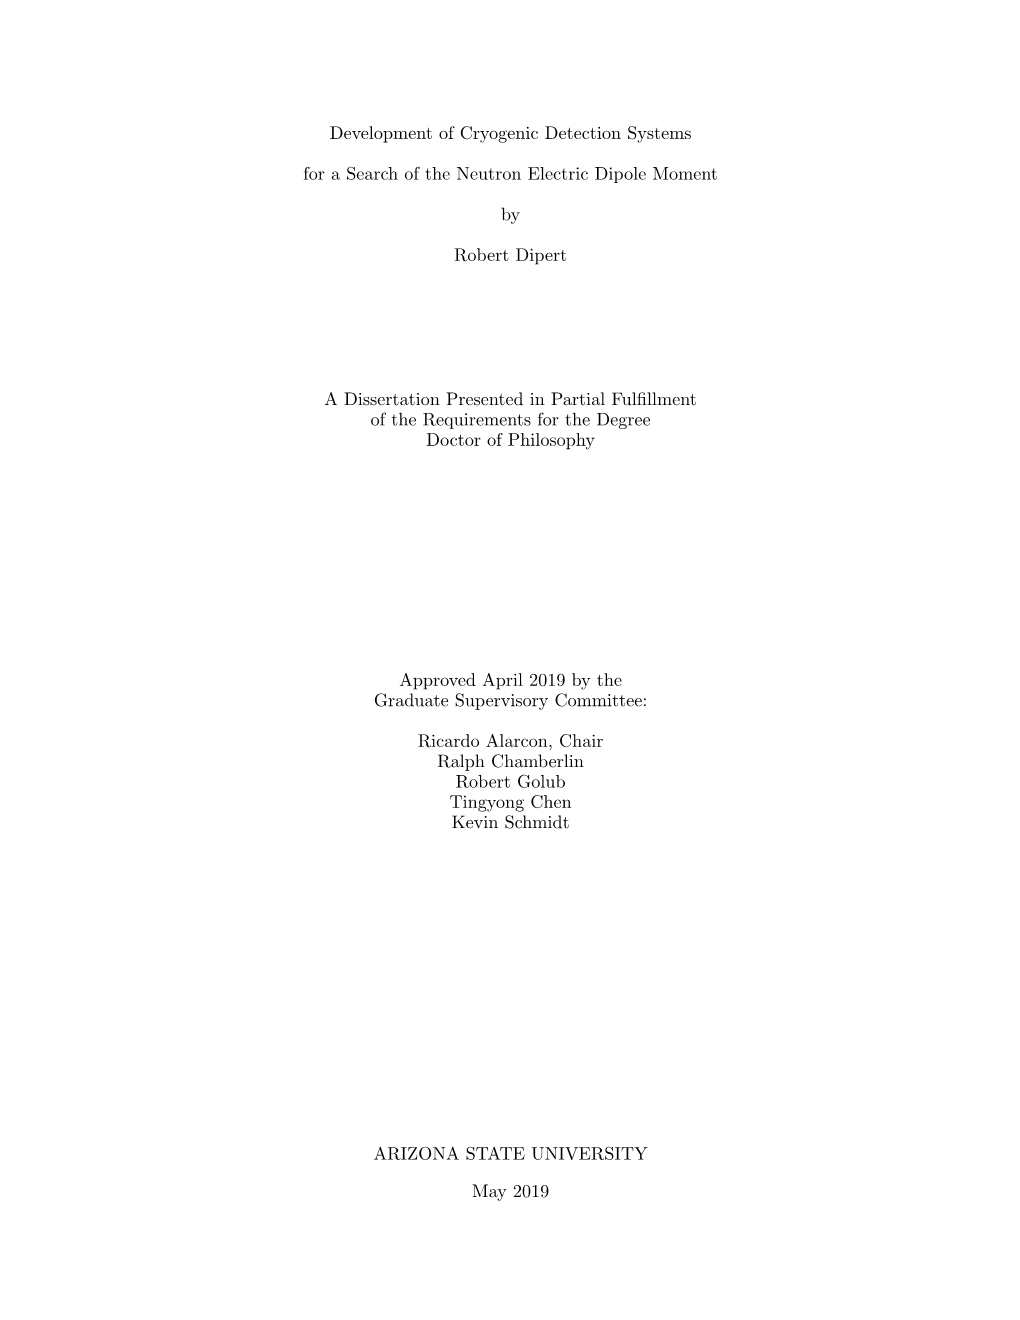 Development of Cryogenic Detection Systems for a Search of the Neutron Electric Dipole Moment by Robert Dipert a Dissertation Pr